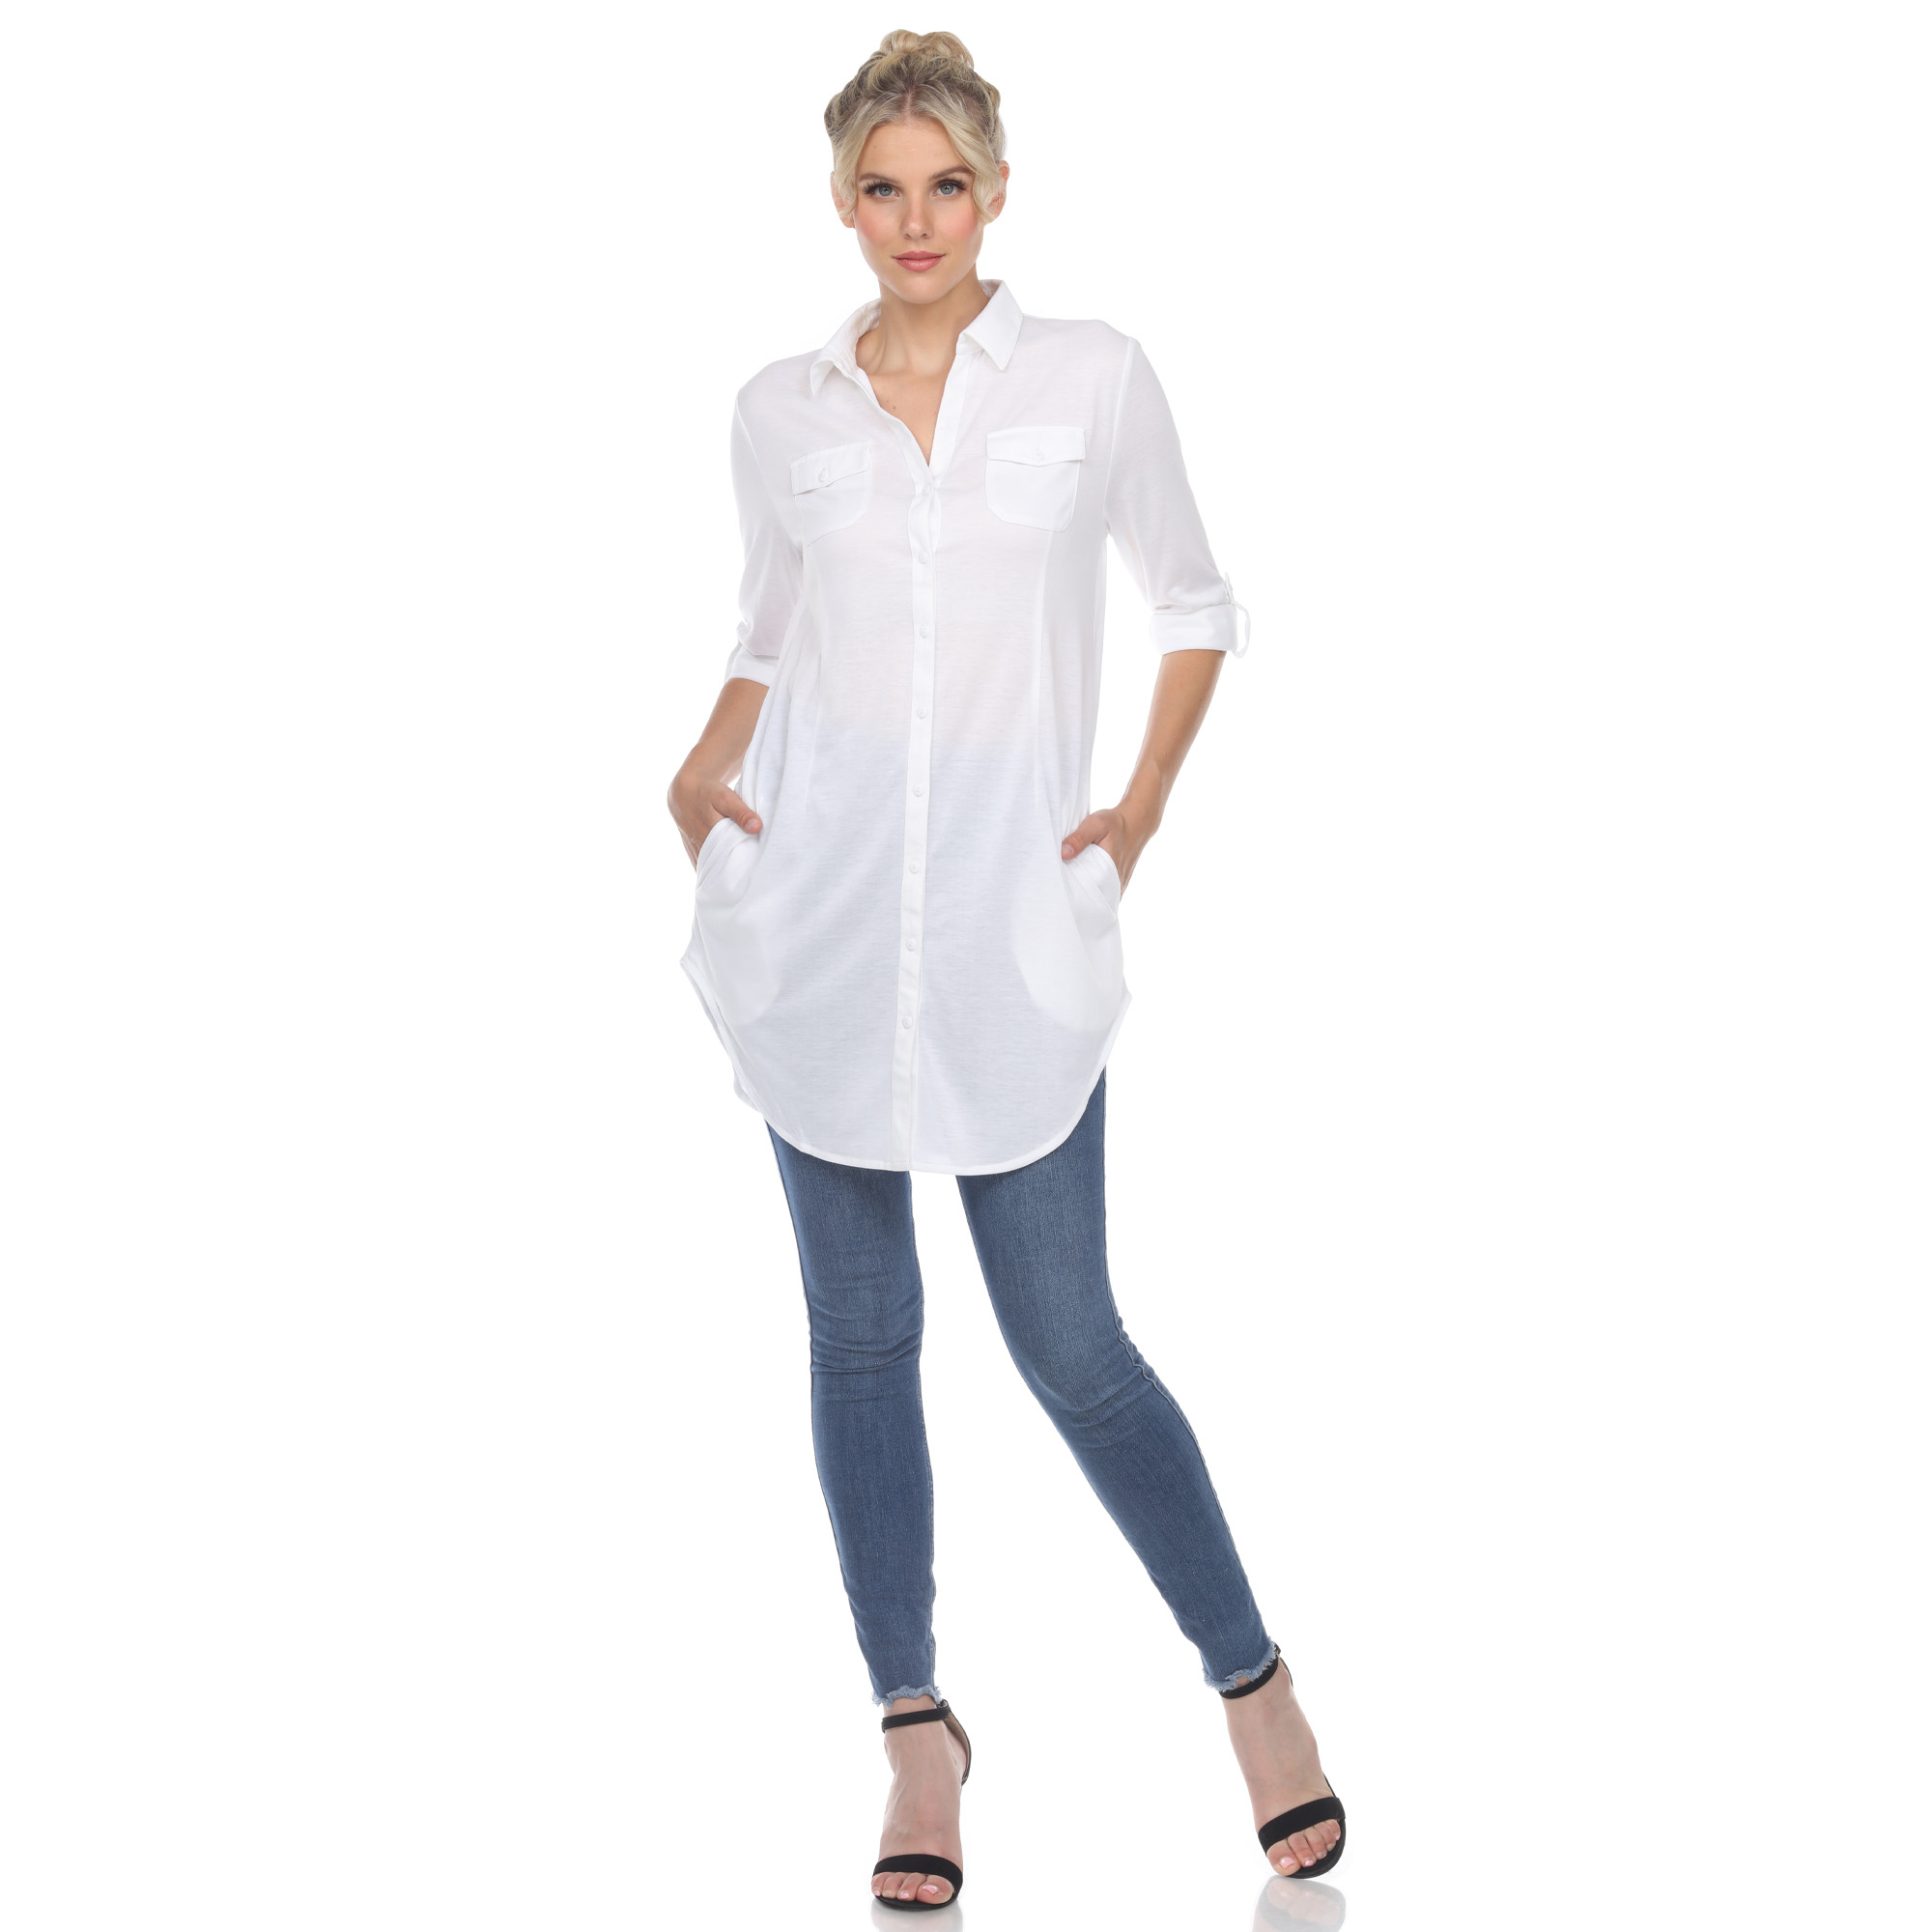 White Mark Women's Stretchy Quarter Sleeve Button Down Tunic Top With Pockets - White, Small